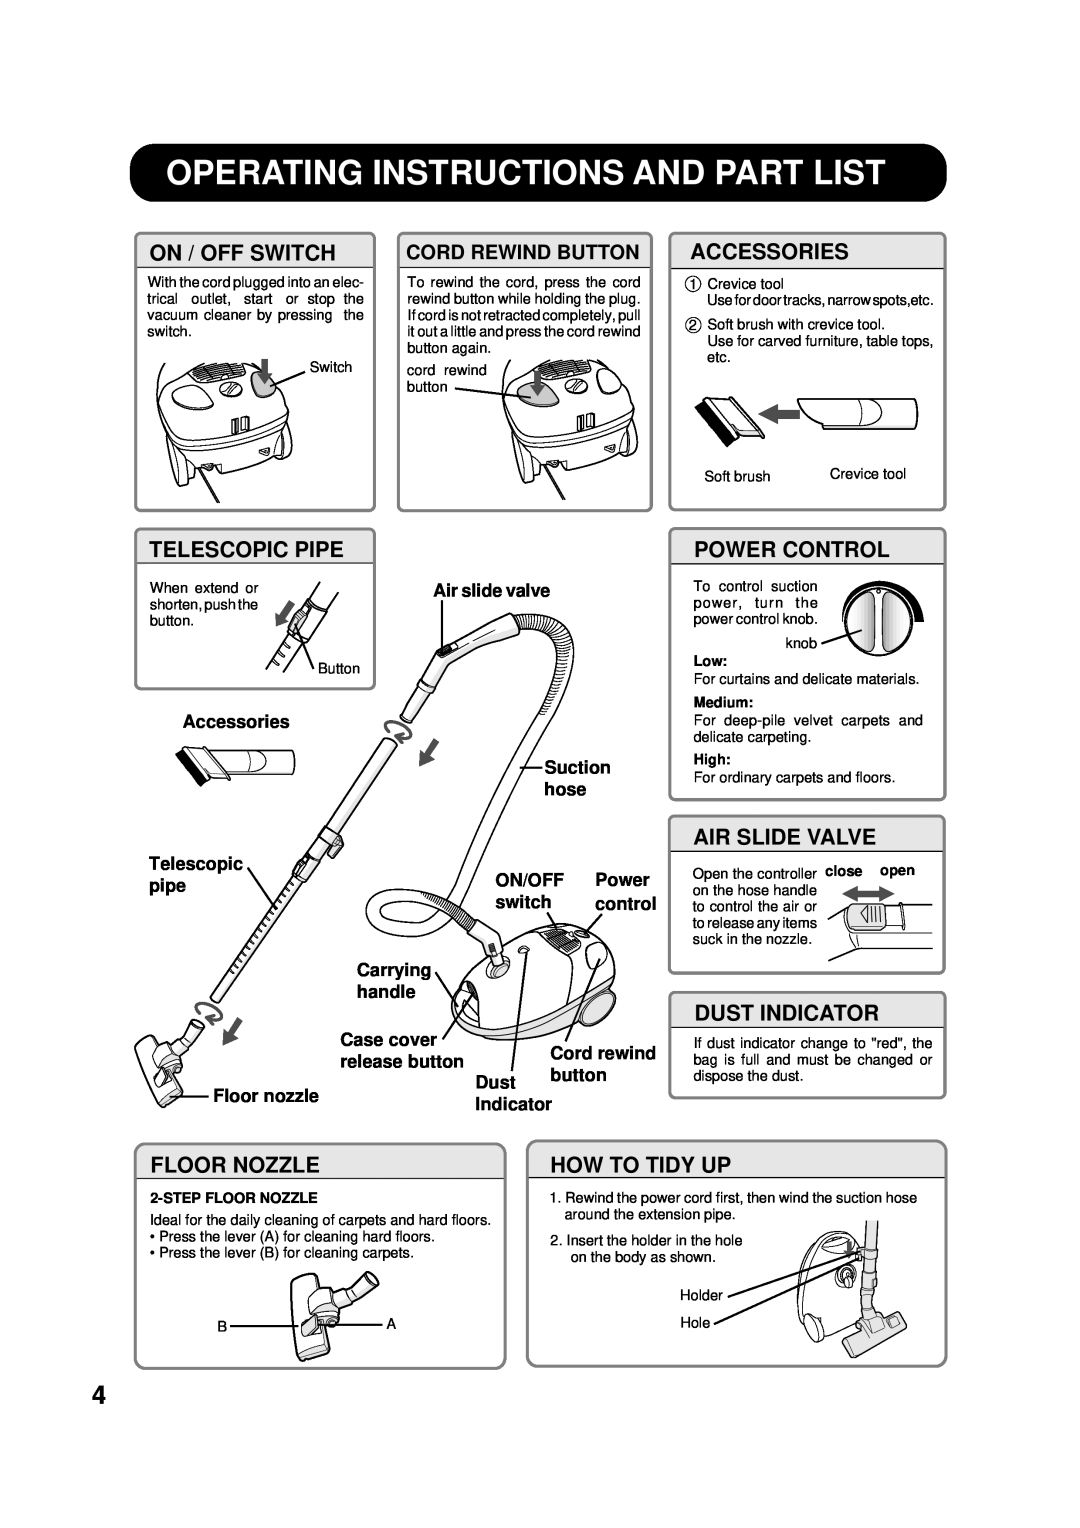 Sharp EC-6312P Operating Instructions And Part List, Accessories Suction hose, Telescopic, On/Off, Power, pipe, switch 